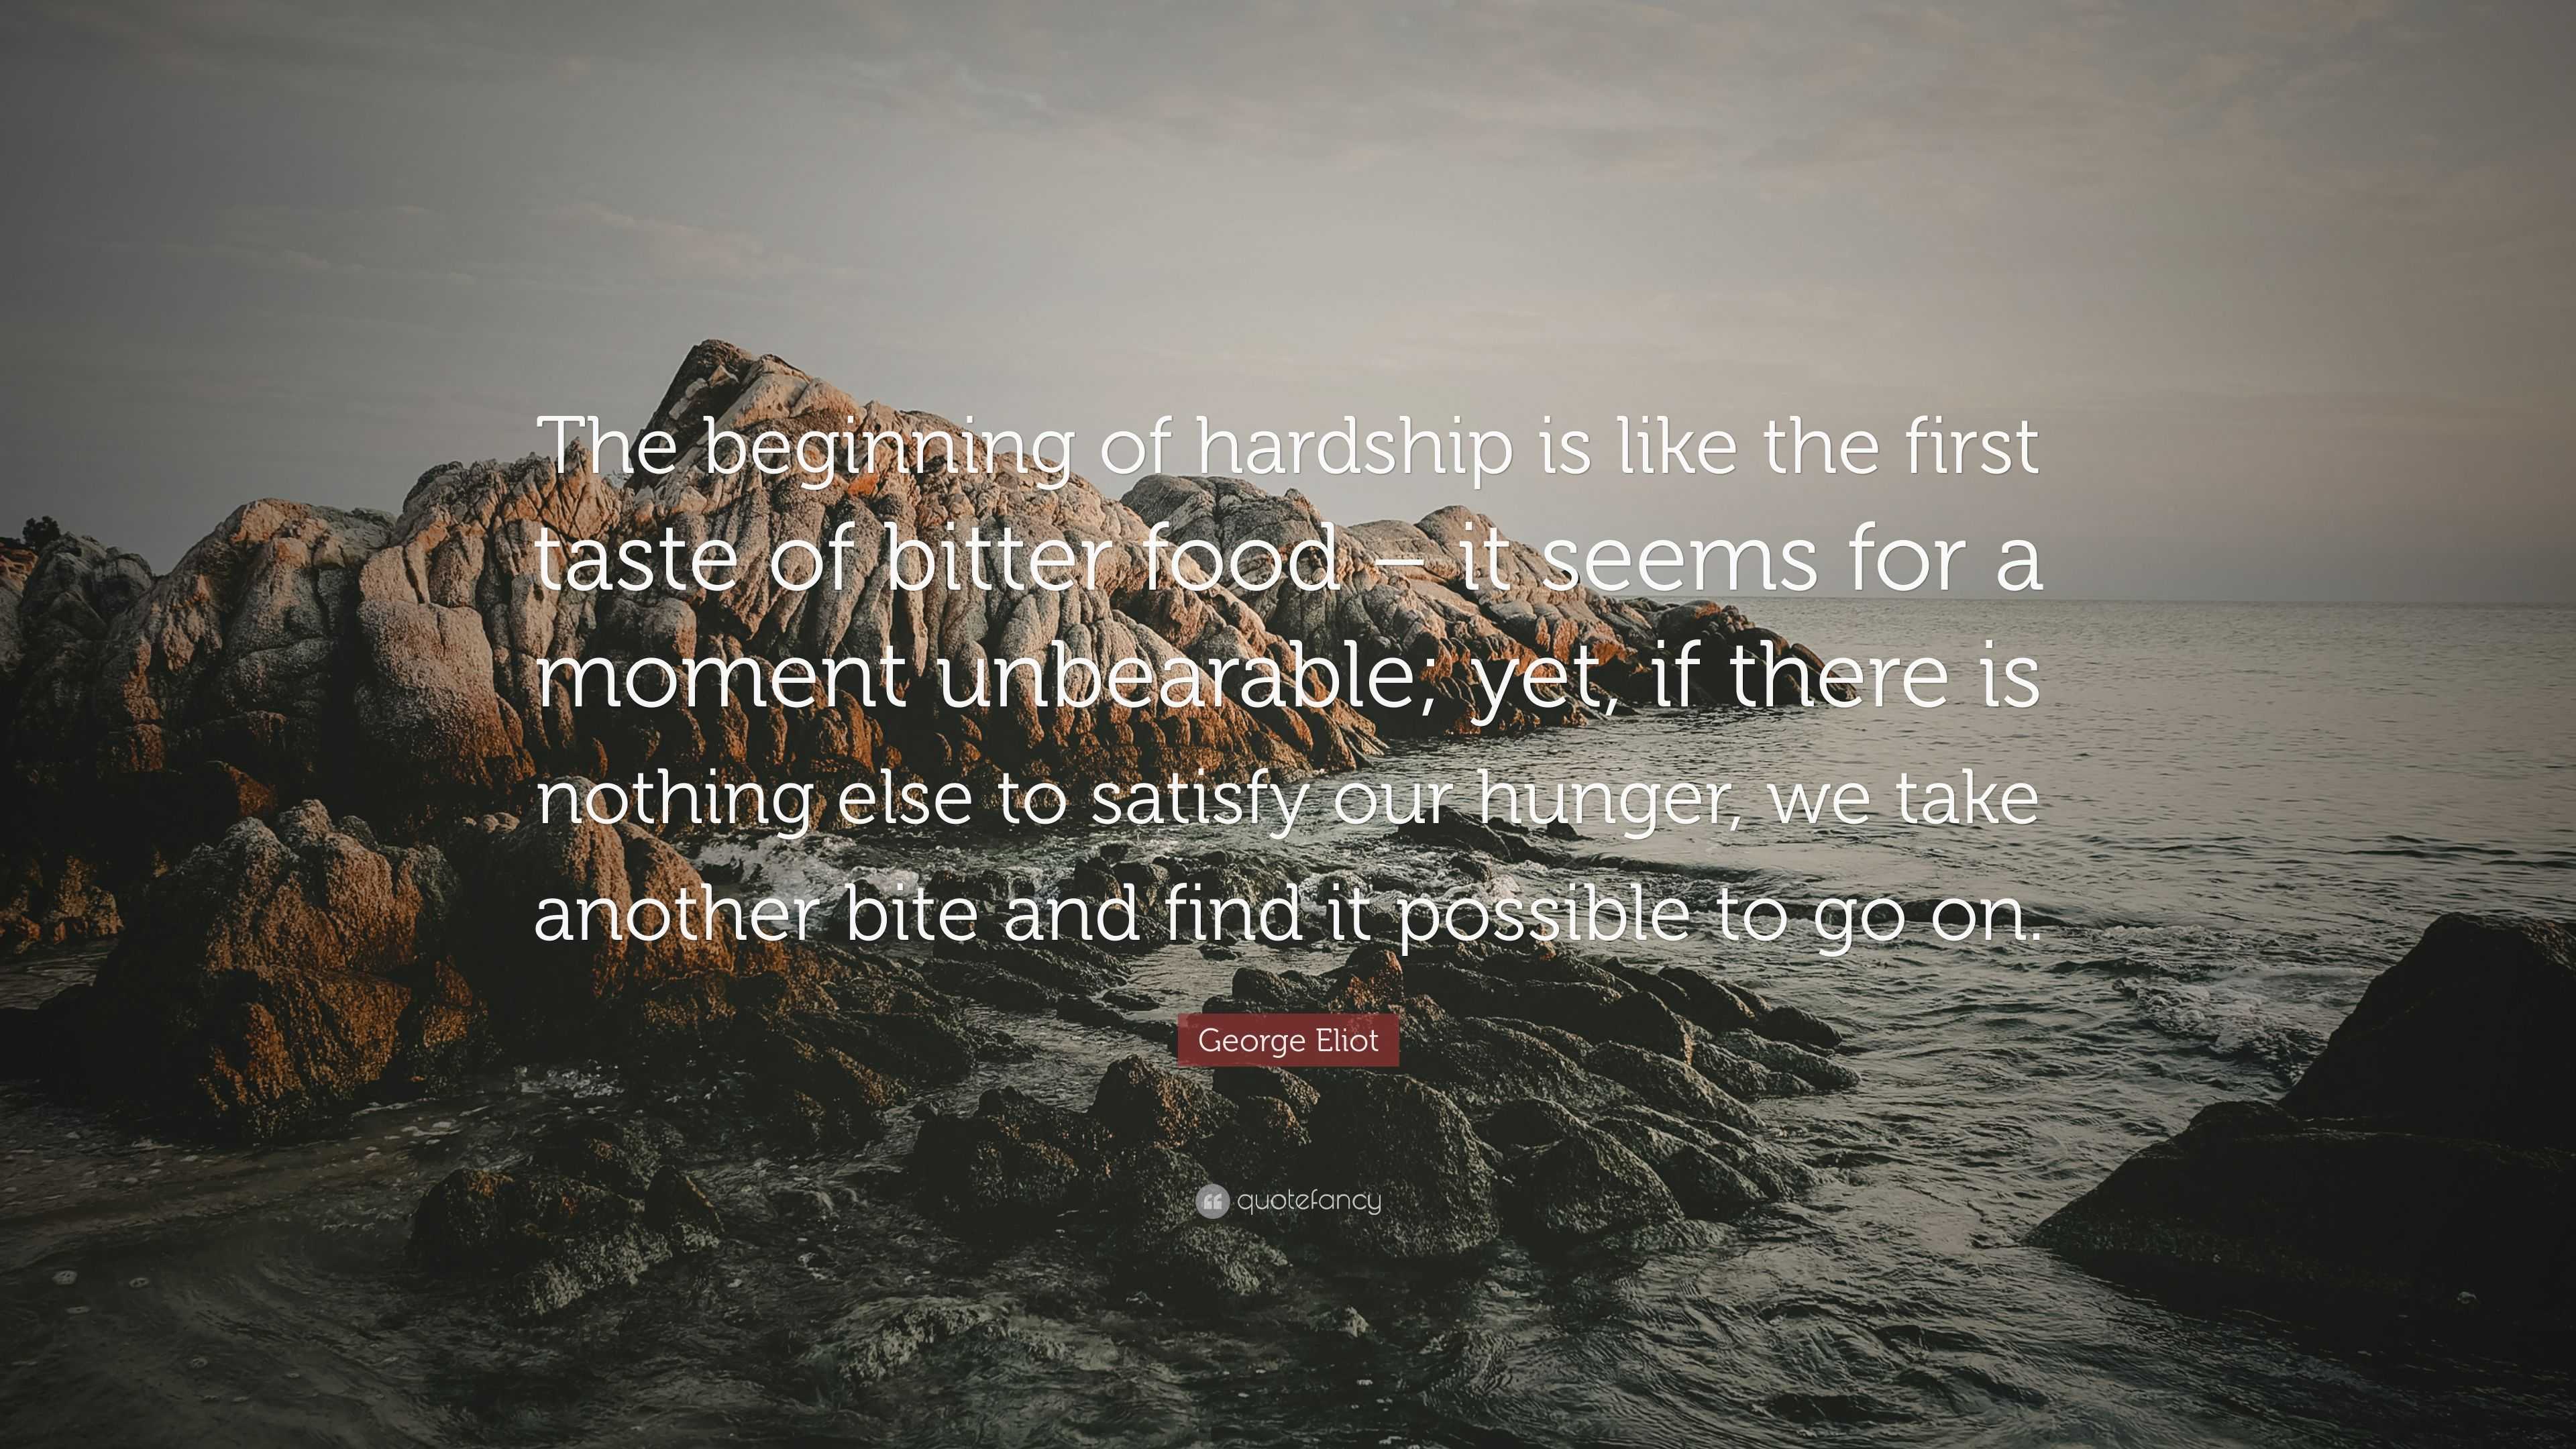 George Eliot Quote: “The beginning of hardship is like the first taste ...